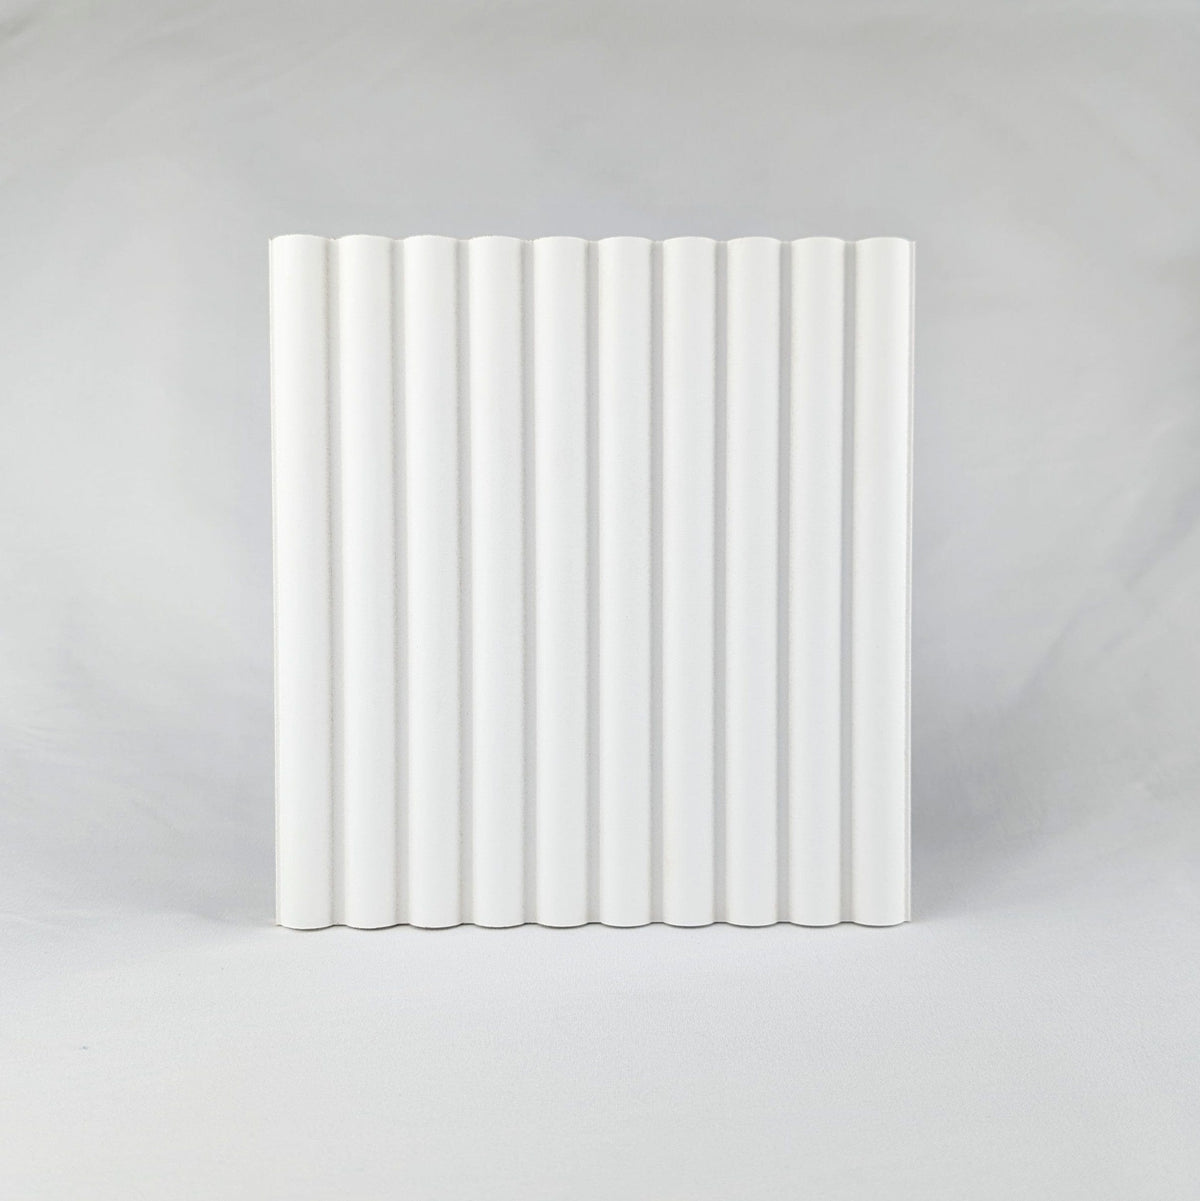 Walston Architectural Products Wall Panel (4) 12&quot; x 94&quot; Sections / 31.33 sq ft / Primed White MDF Reeded Wall Panels - 3/4&quot; Reeds Reeded Wall Panels - 3/4&quot; Reeds | Walston Door Company